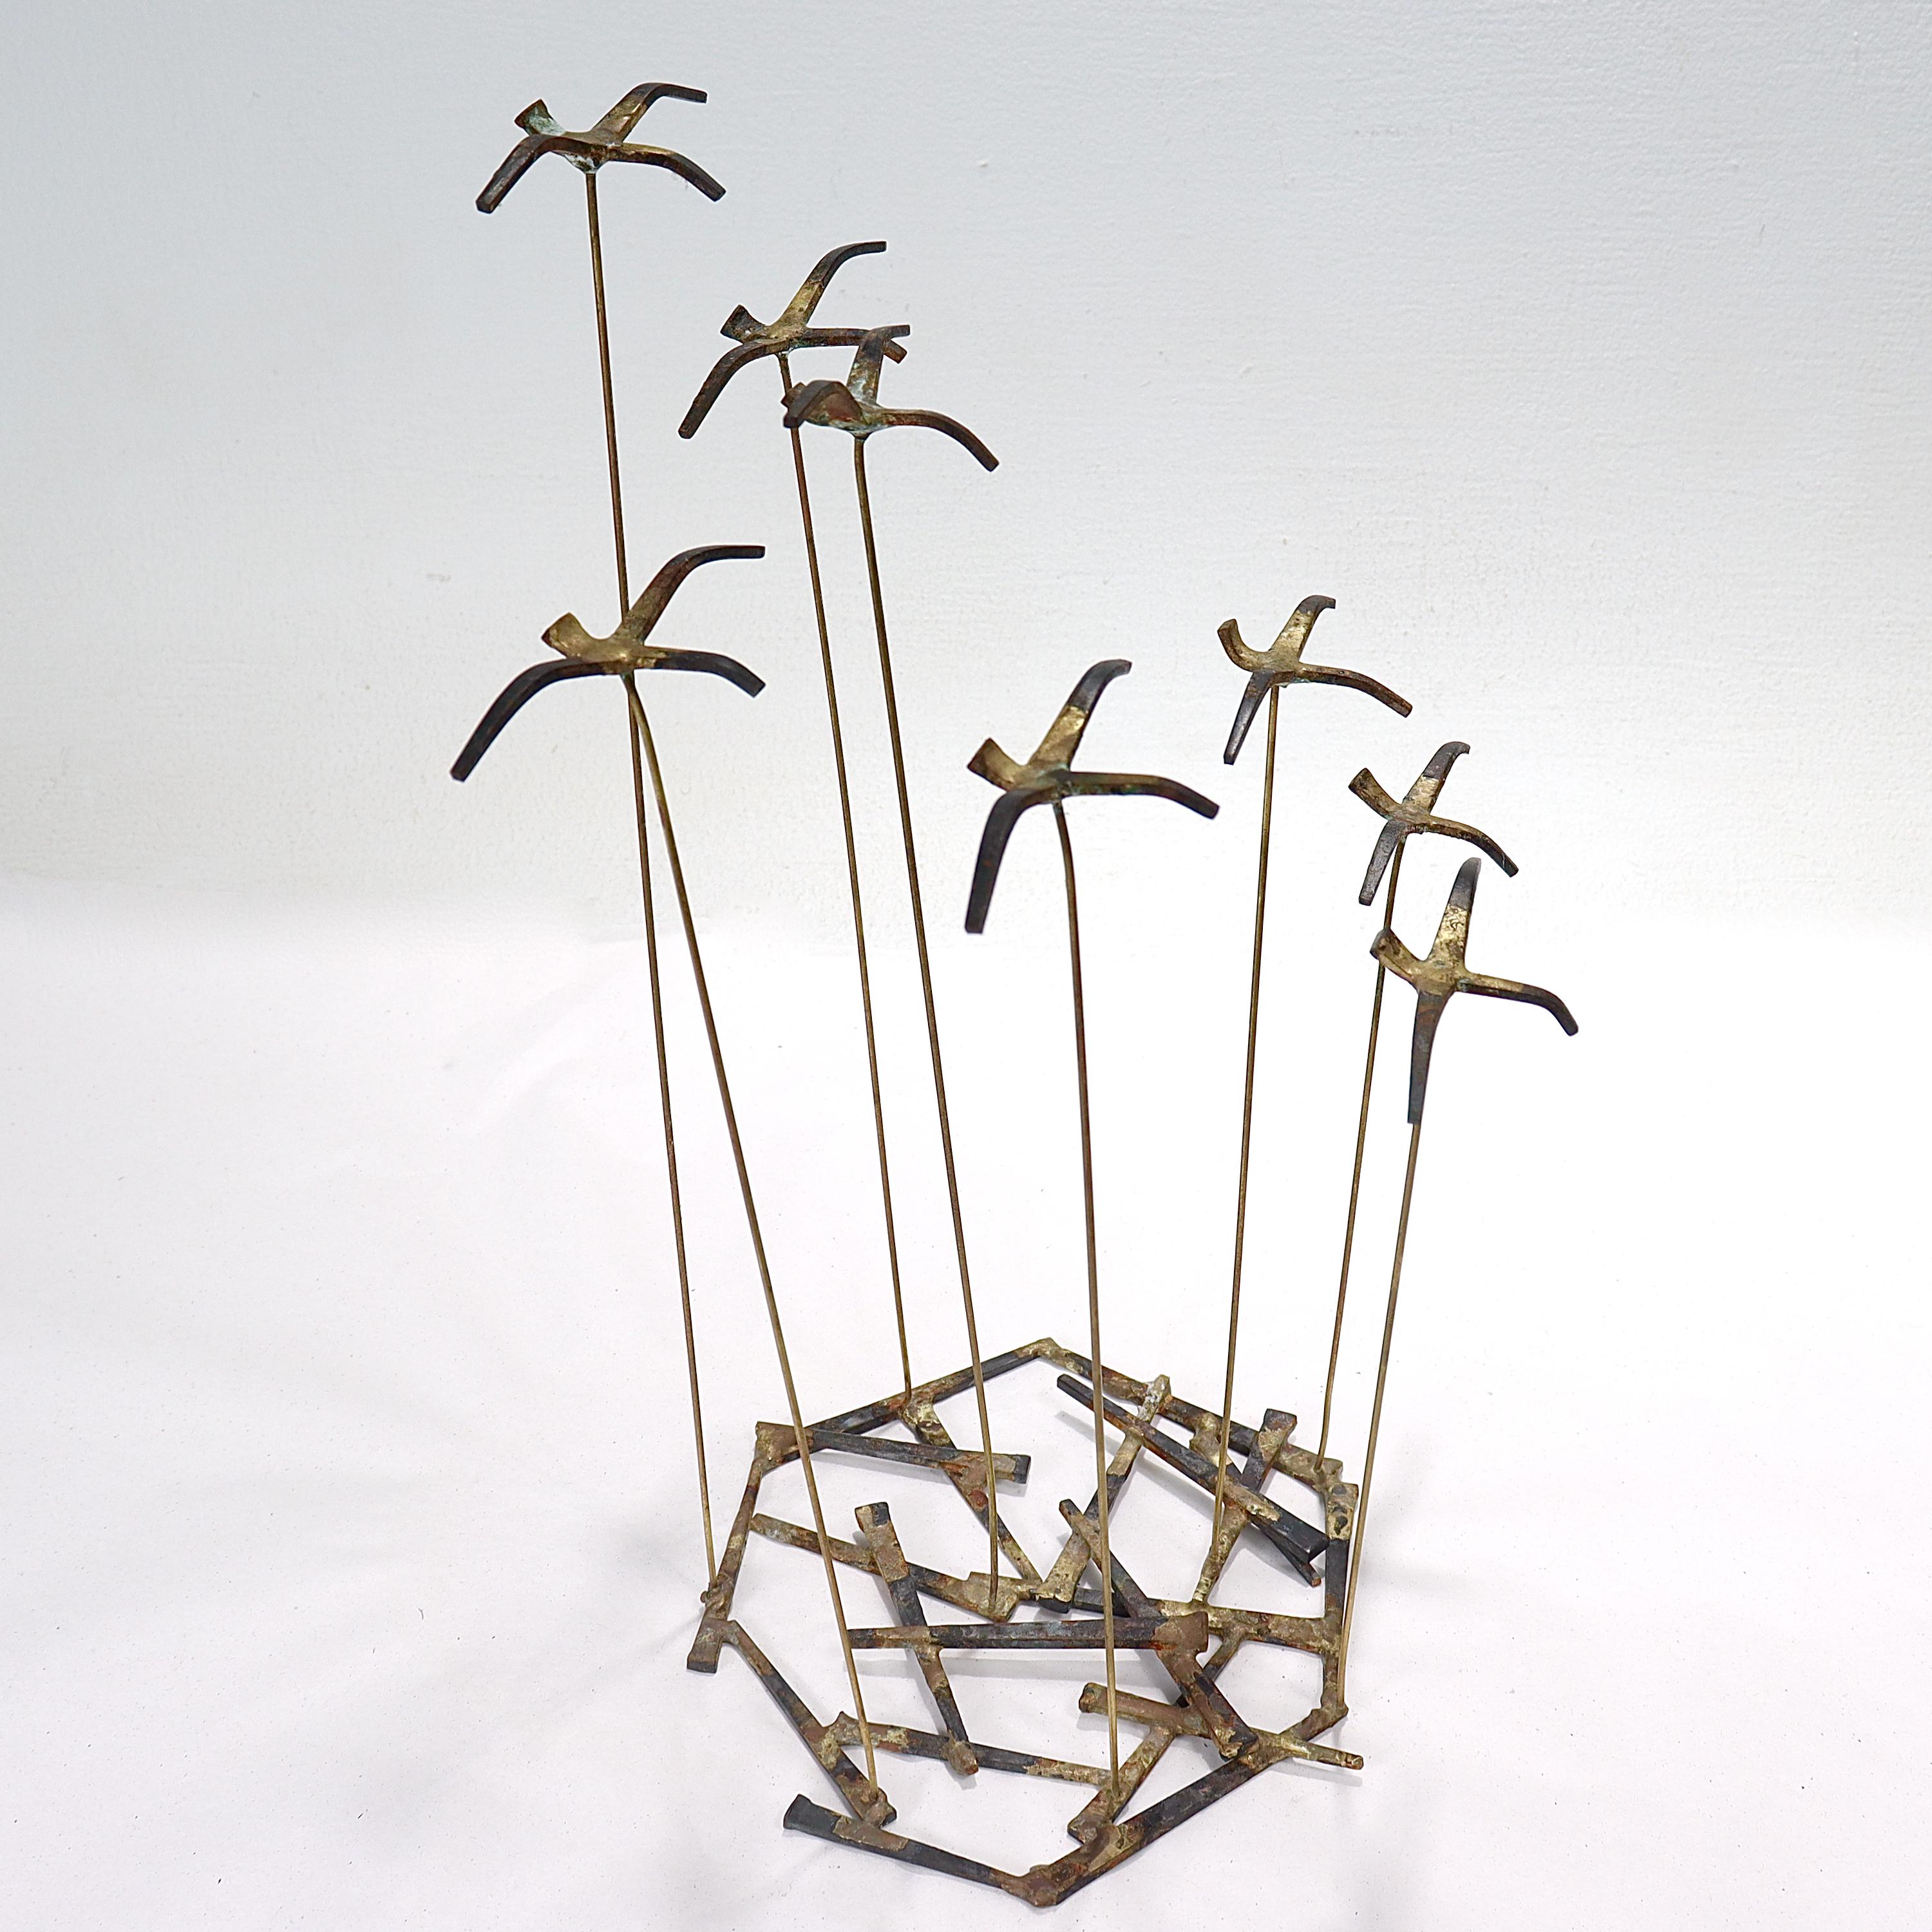 Vintage Mid-Century Modern Cut Square Nail Curtis Jere Style Birds Sculpture  For Sale 7